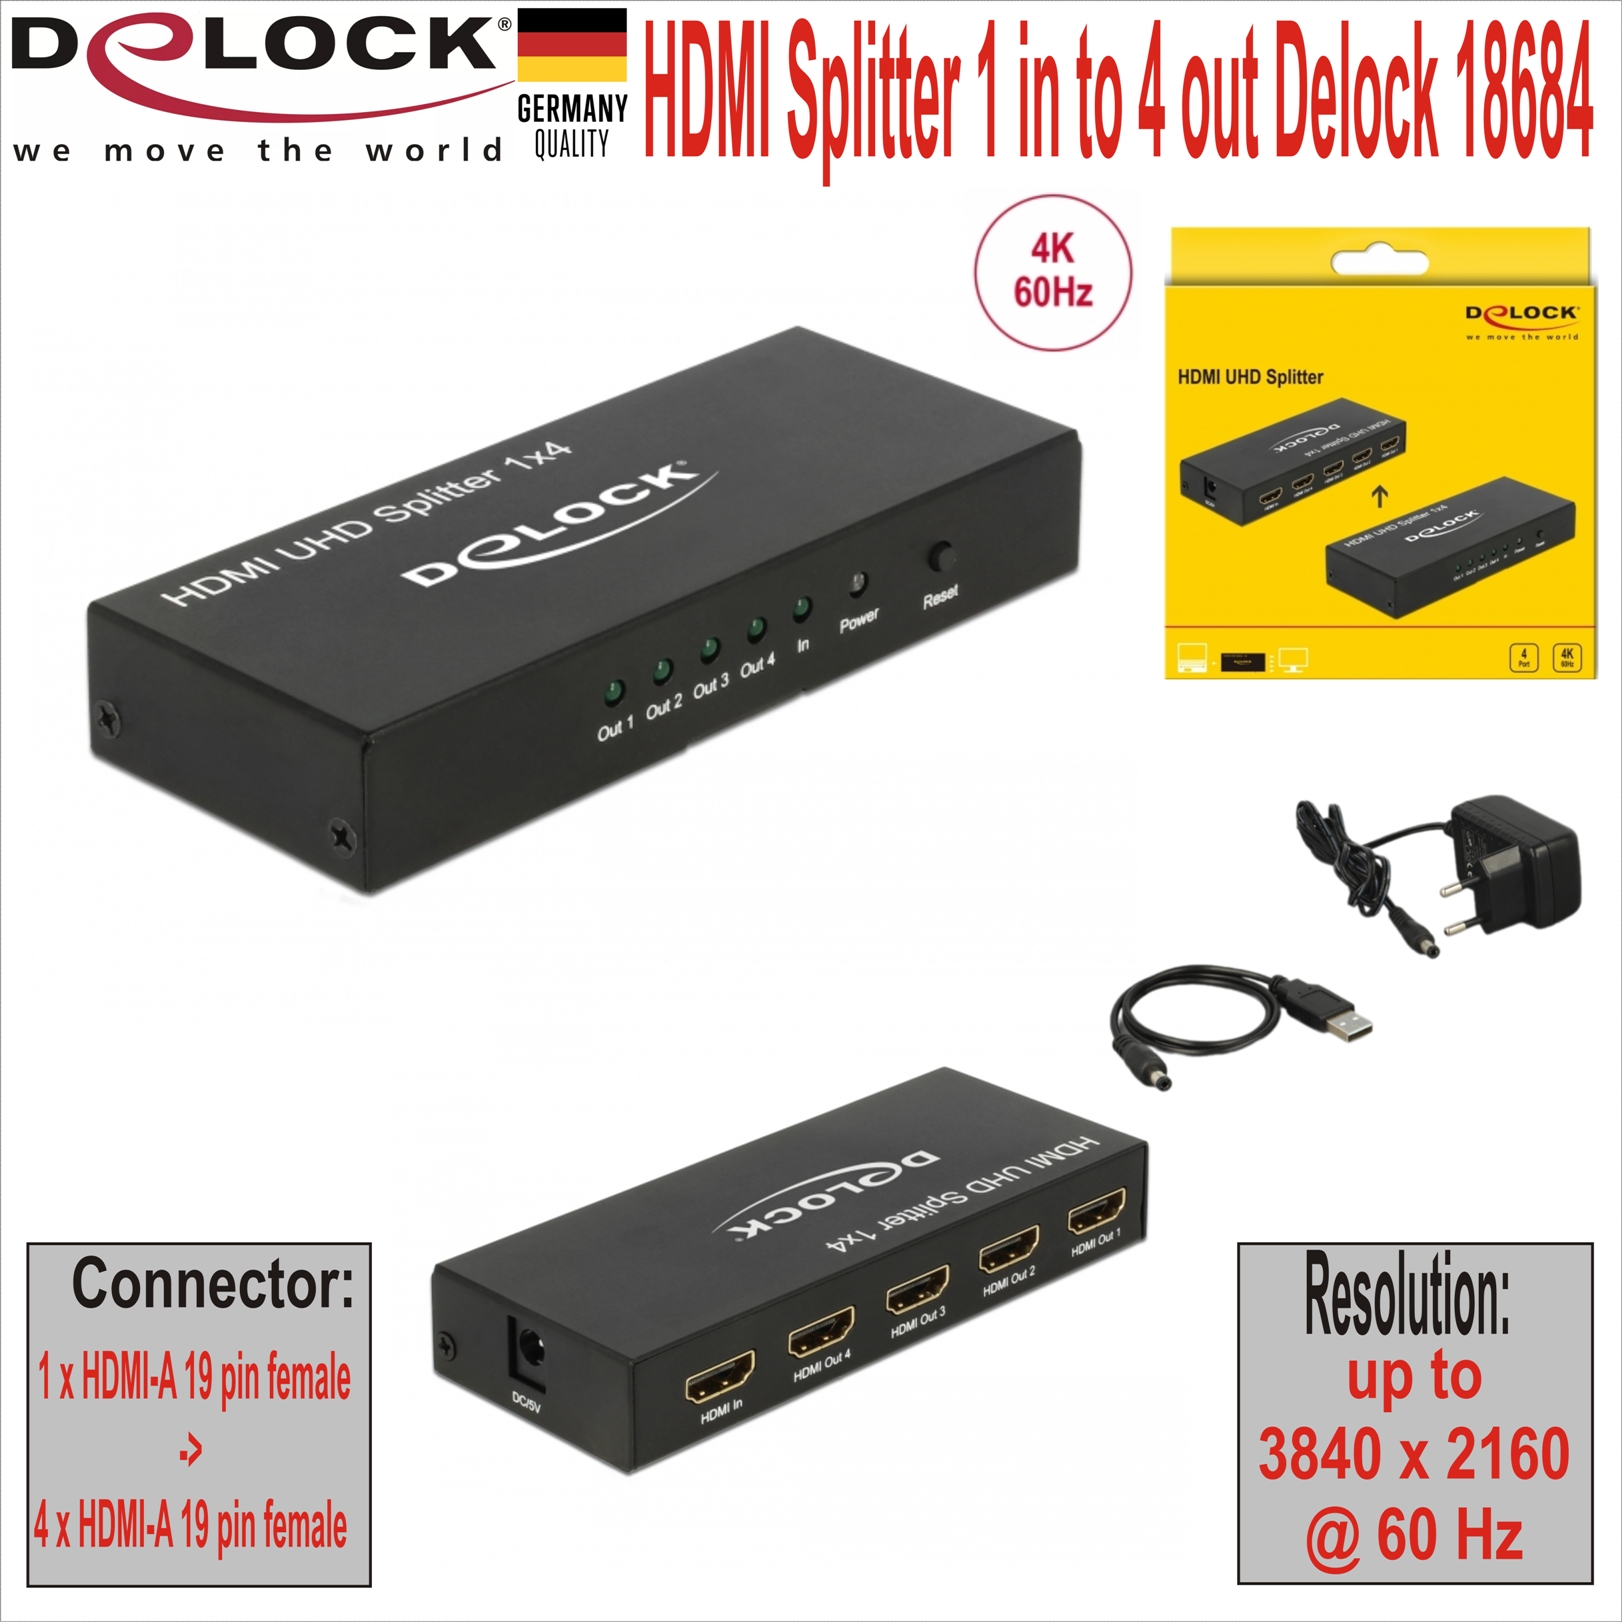 HDMI Splitter 1 in to 4 out Delock 18684